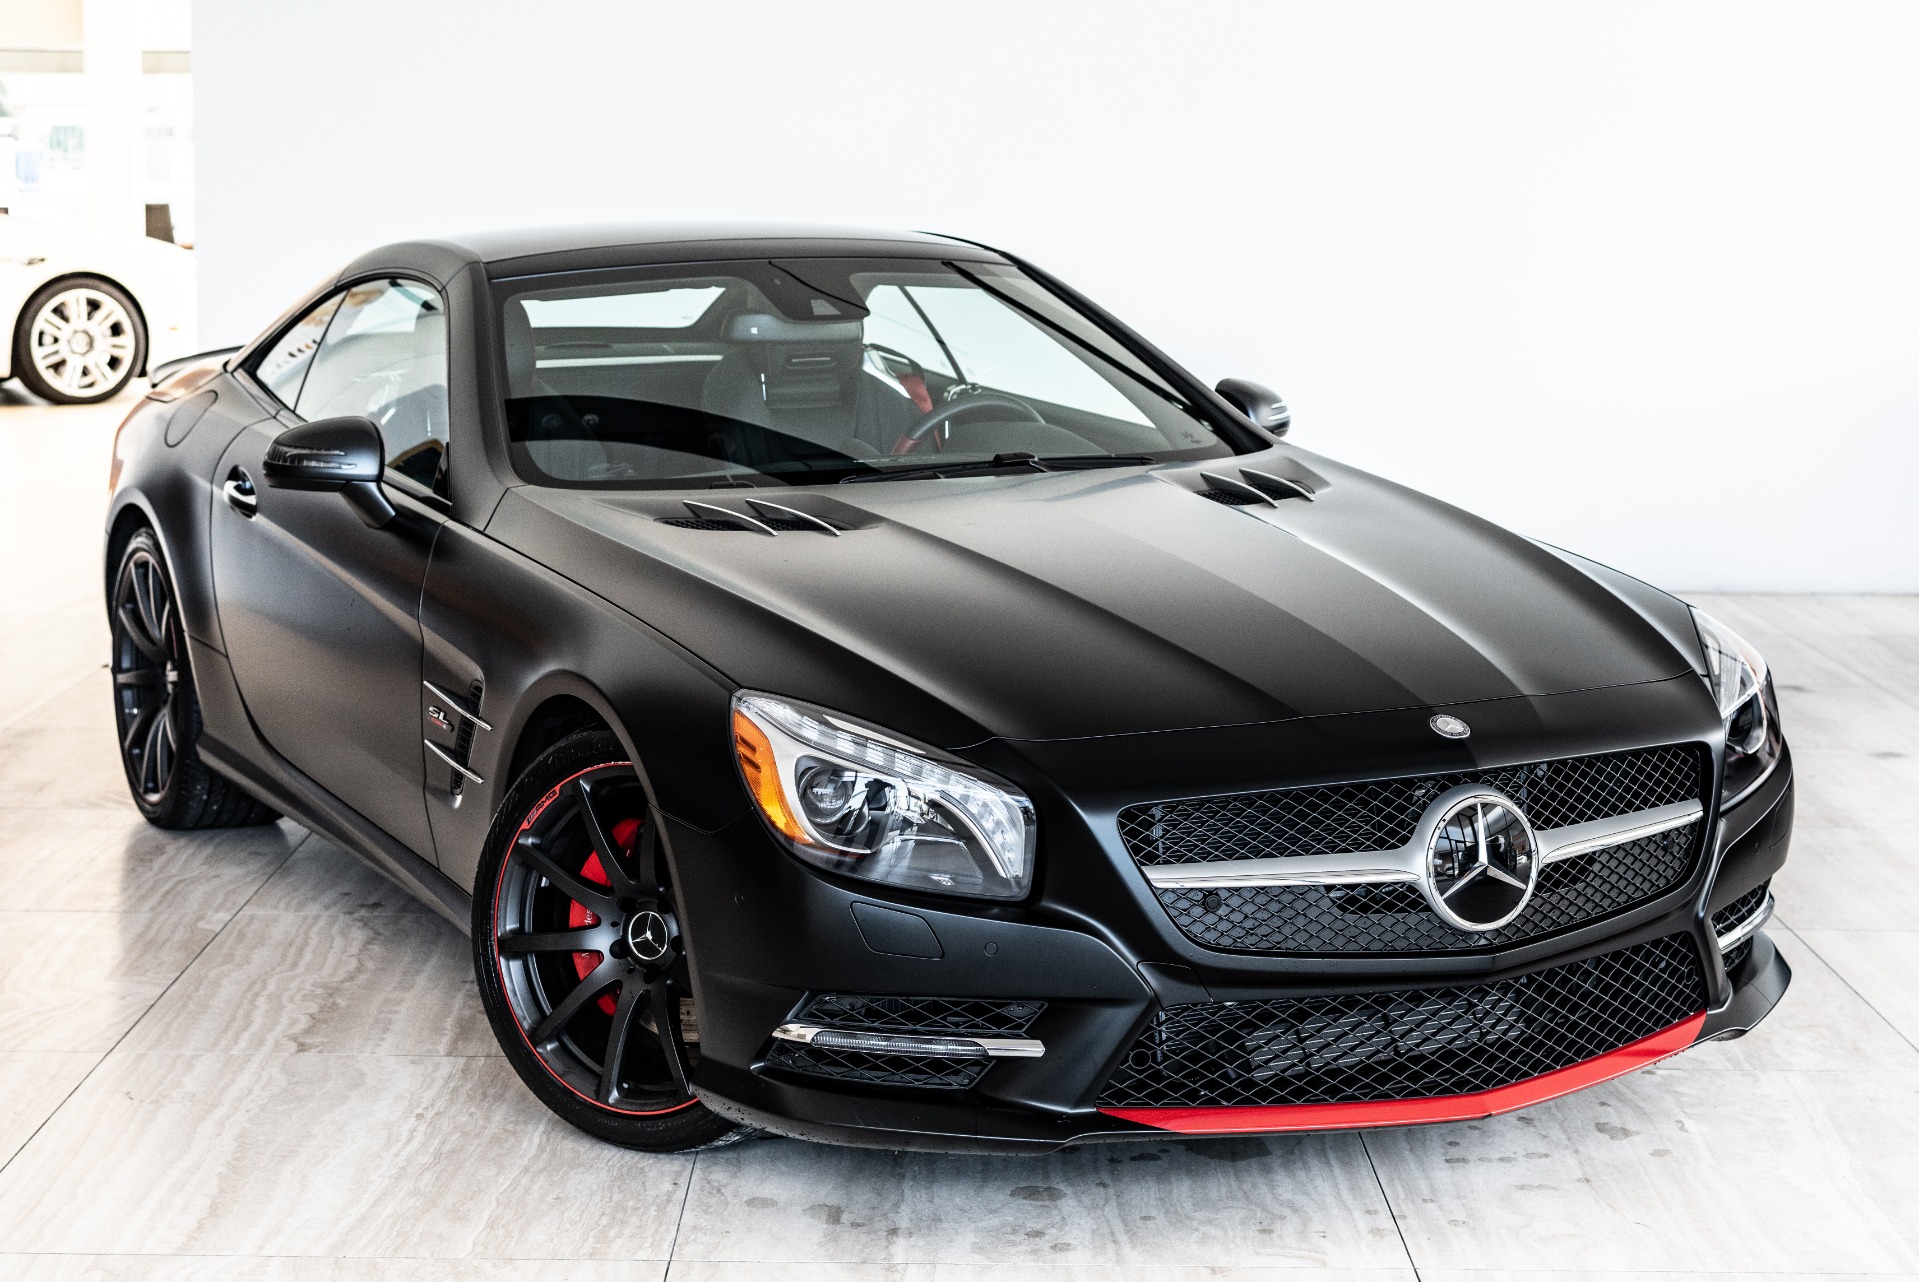 Used 2016 MercedesBenz SL SL 550 For Sale (Sold) Exclusive